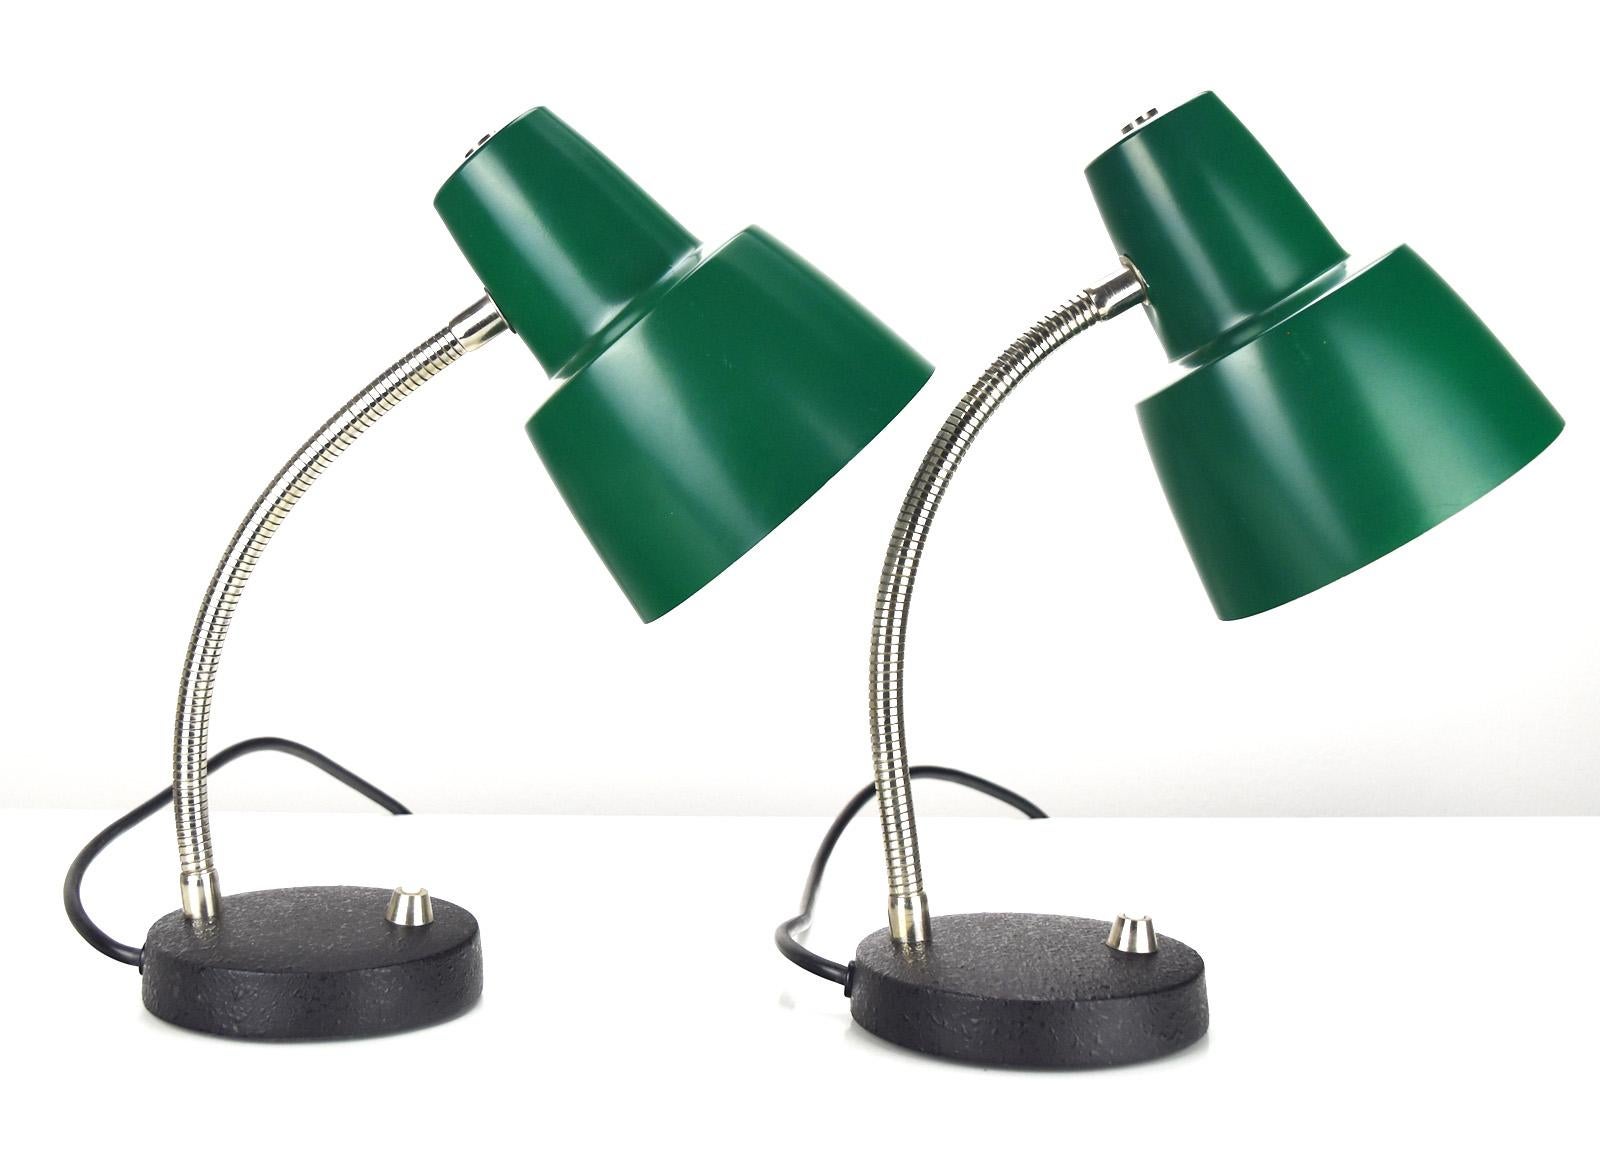 Mid-Century Modern Vintage Pair of Bed Side Table Lamps by Hillebrand 1960s German Green Lacquered For Sale